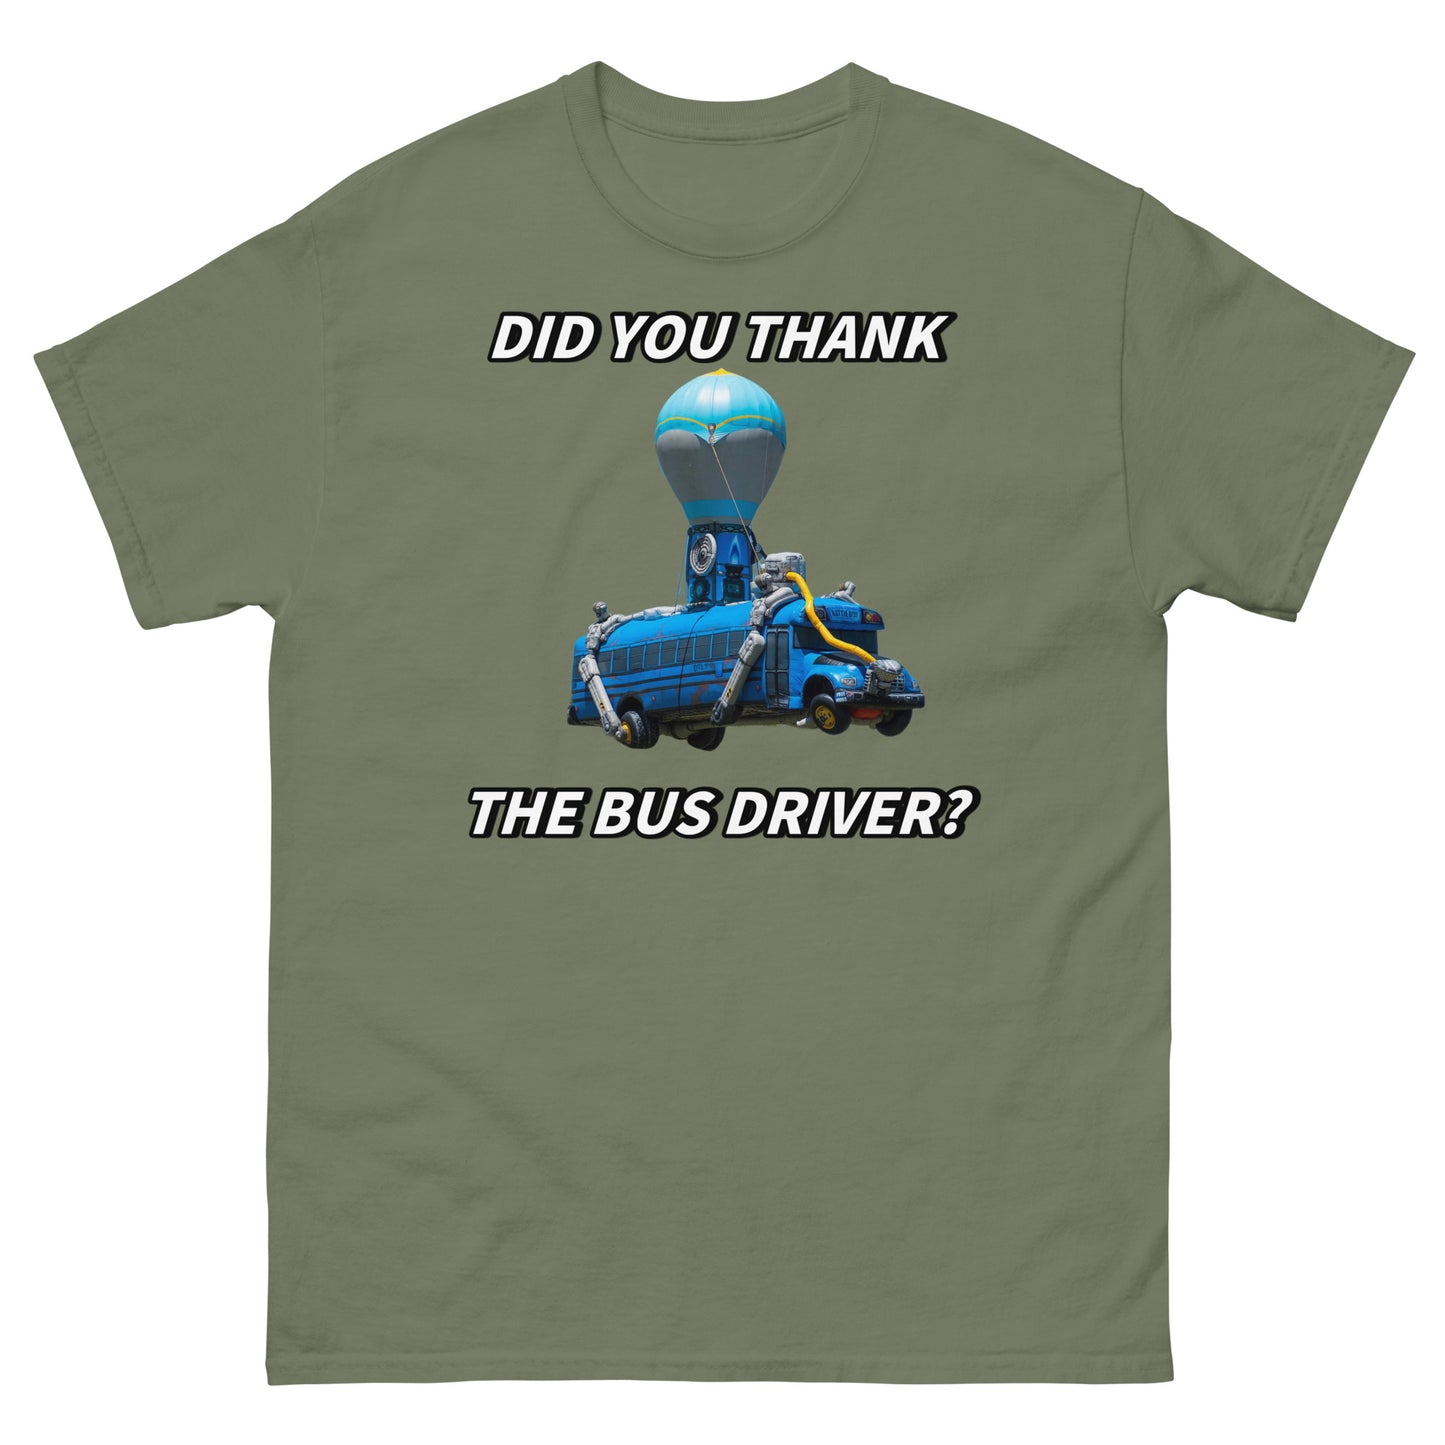 Did you thank the bus driver? Cringey Tee